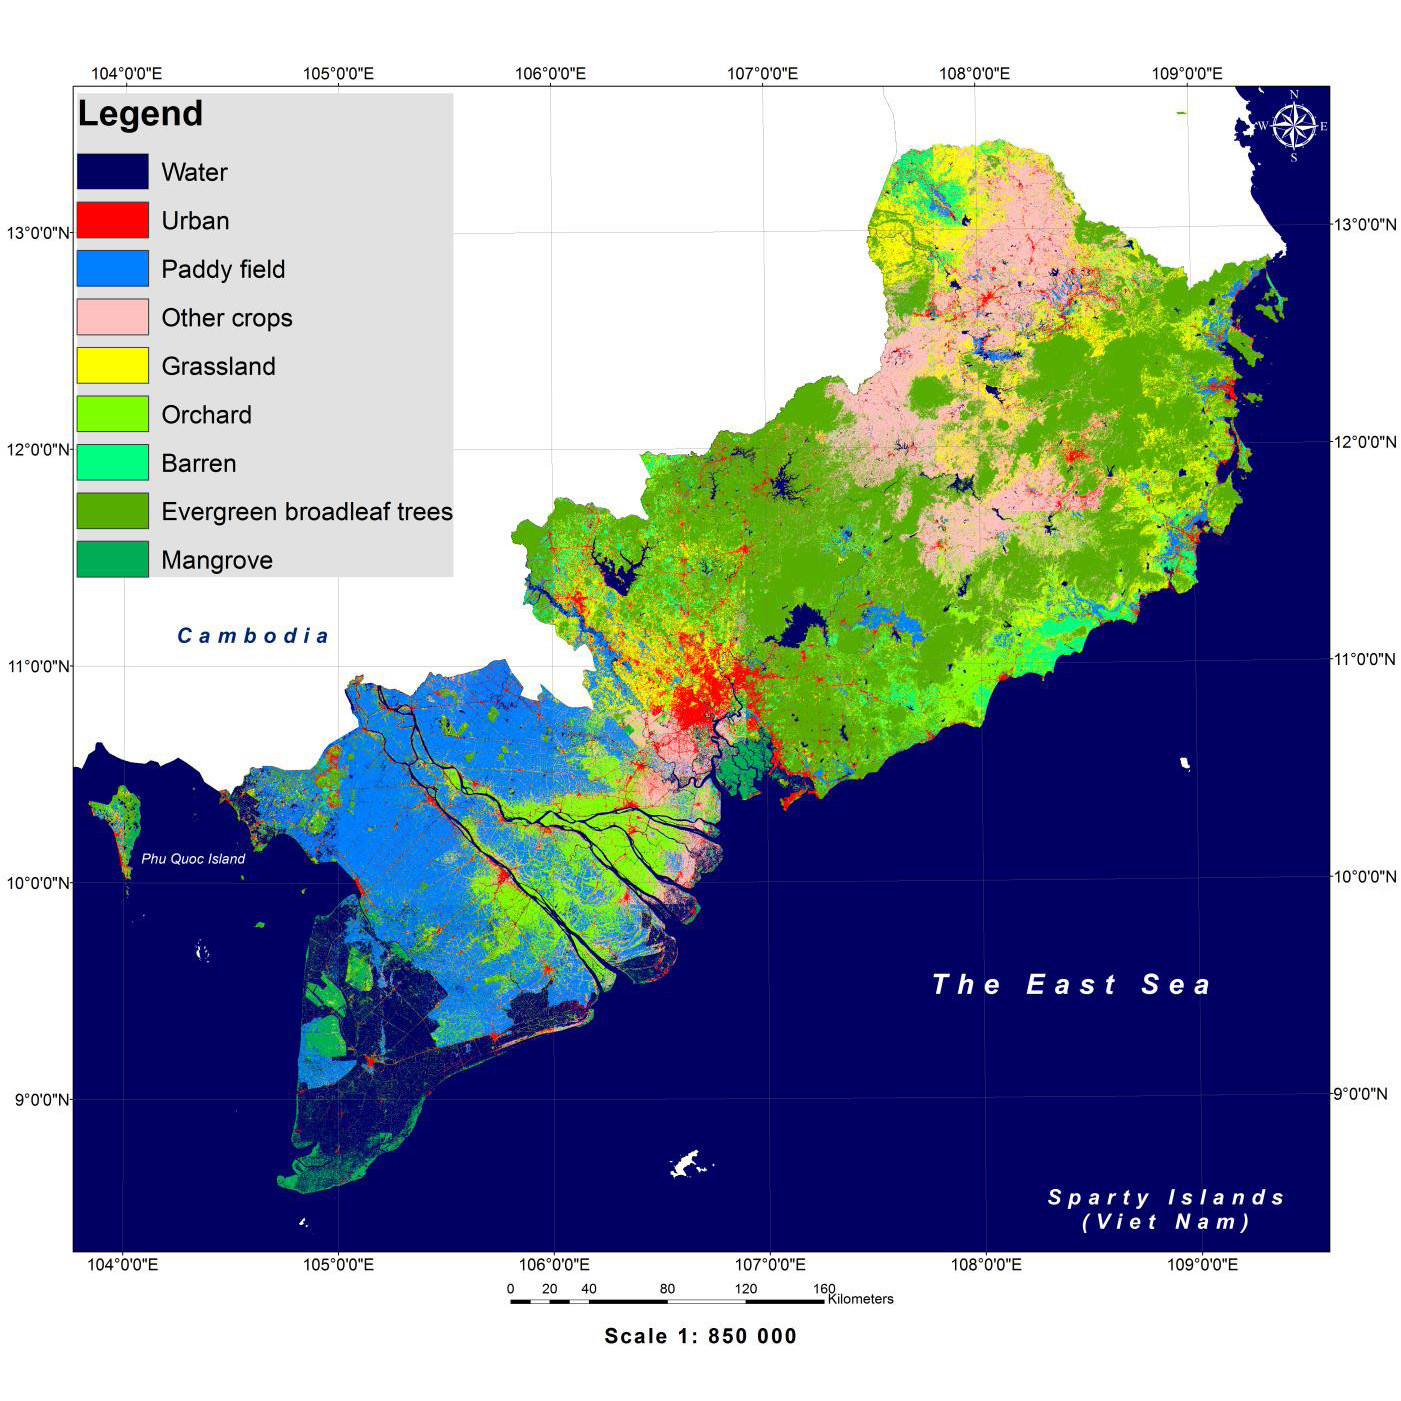 HRLULC map of the southern region of Vietnam (ver.18.09) has been released.